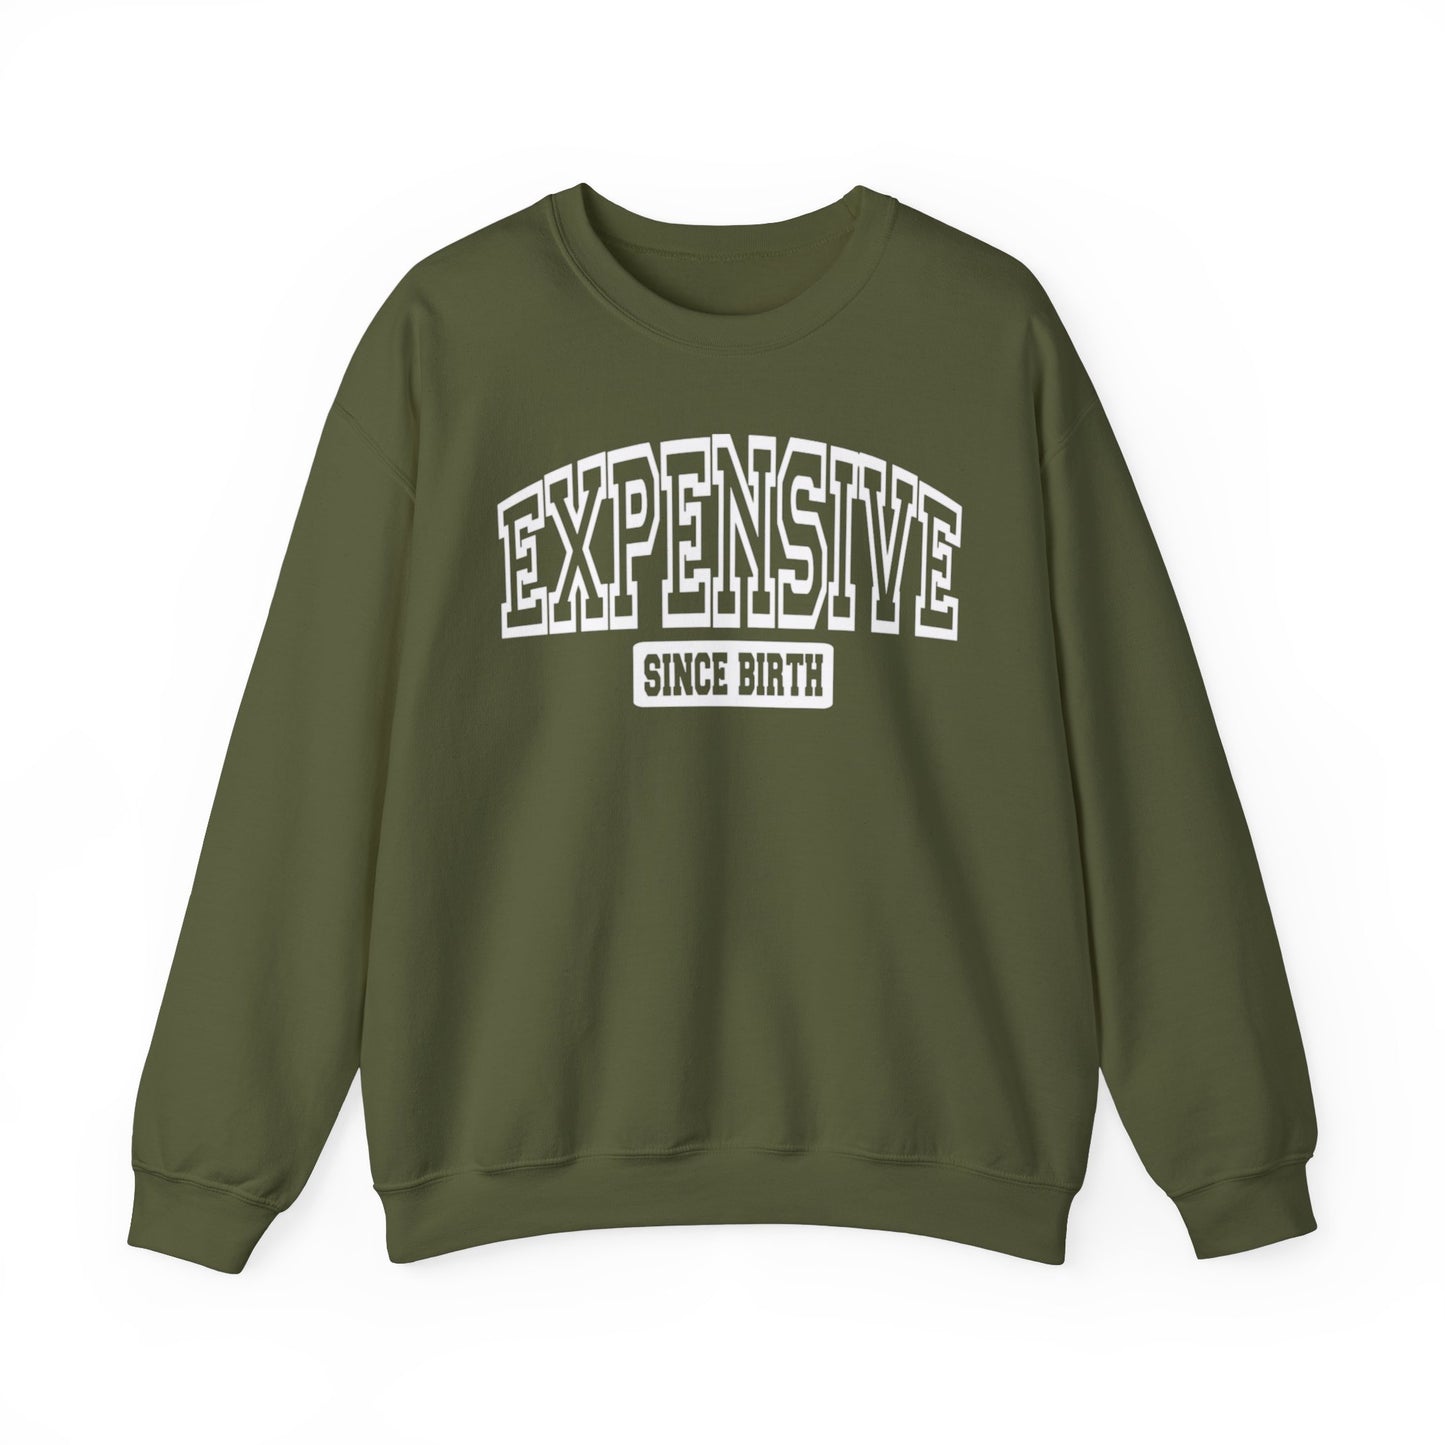 Luxe Vibes EXPENSIVE Statement Sweatshirt for High-Fashion Comfort and Chic Style, with Collegiate Font